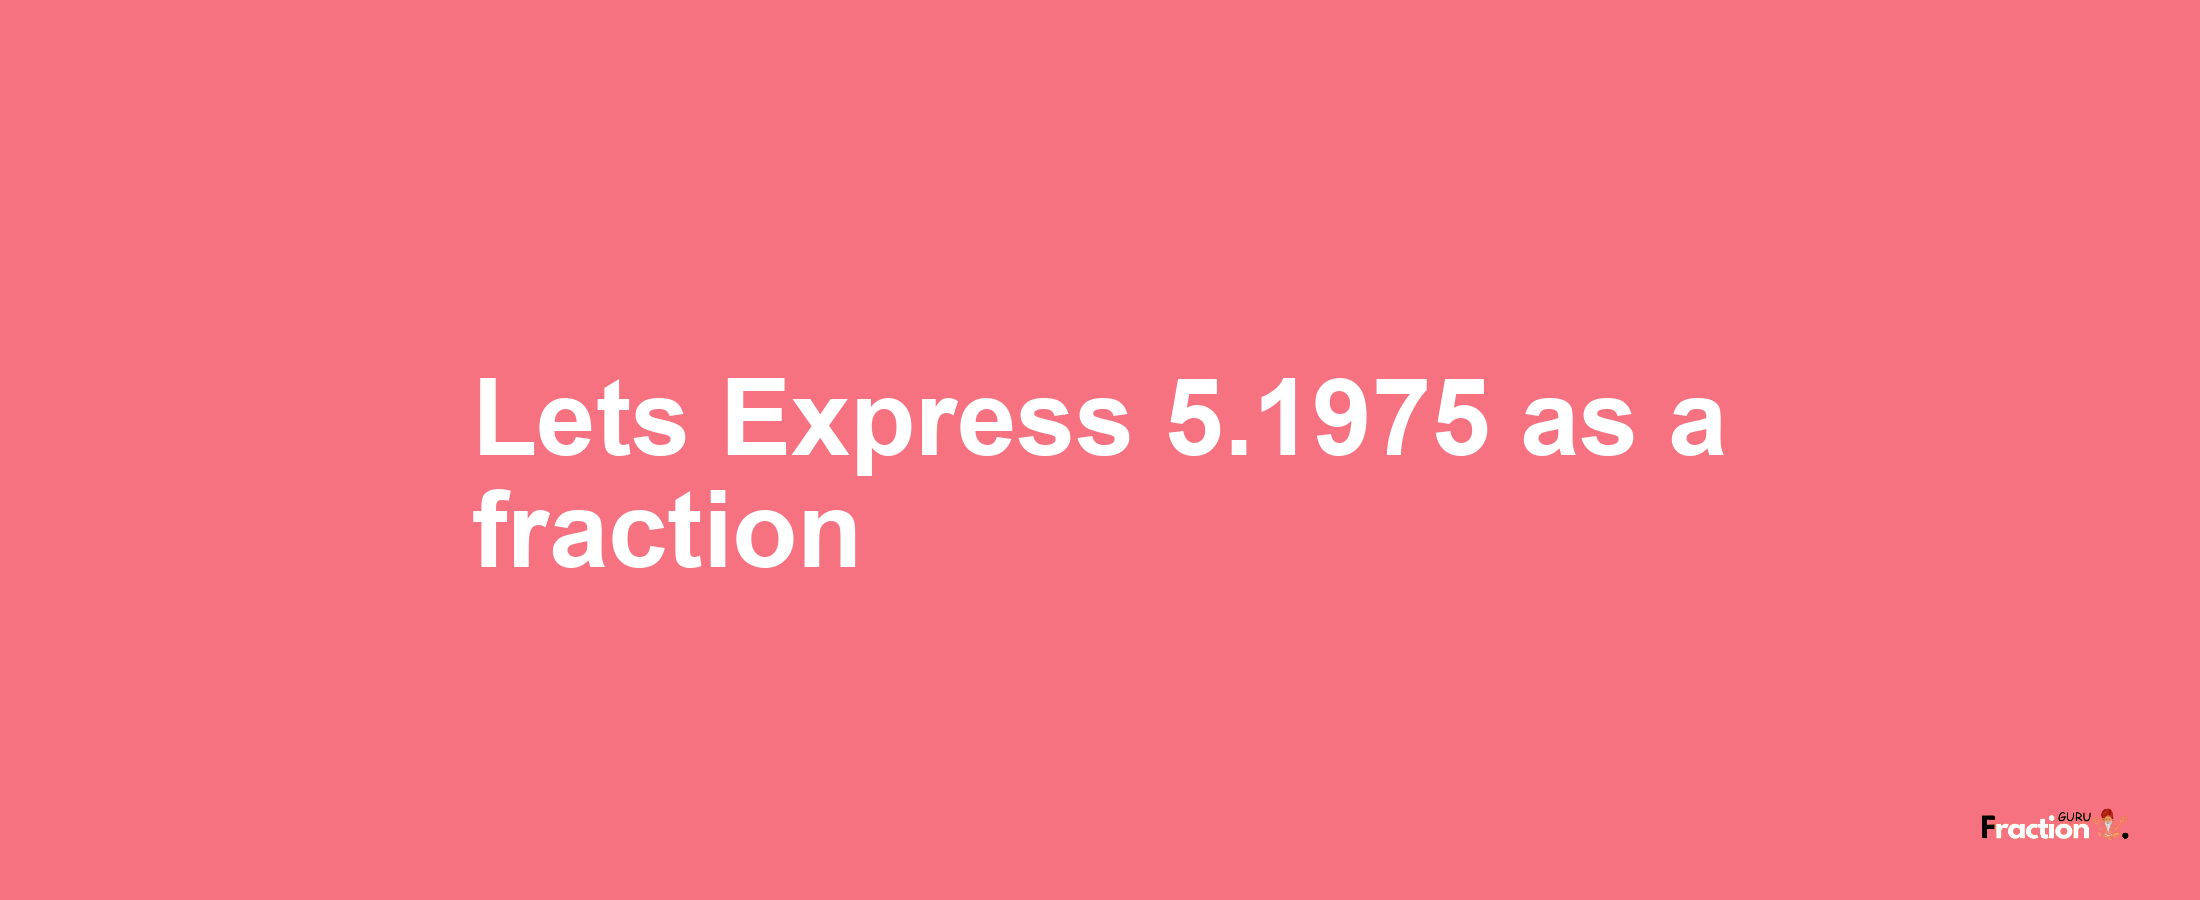 Lets Express 5.1975 as afraction